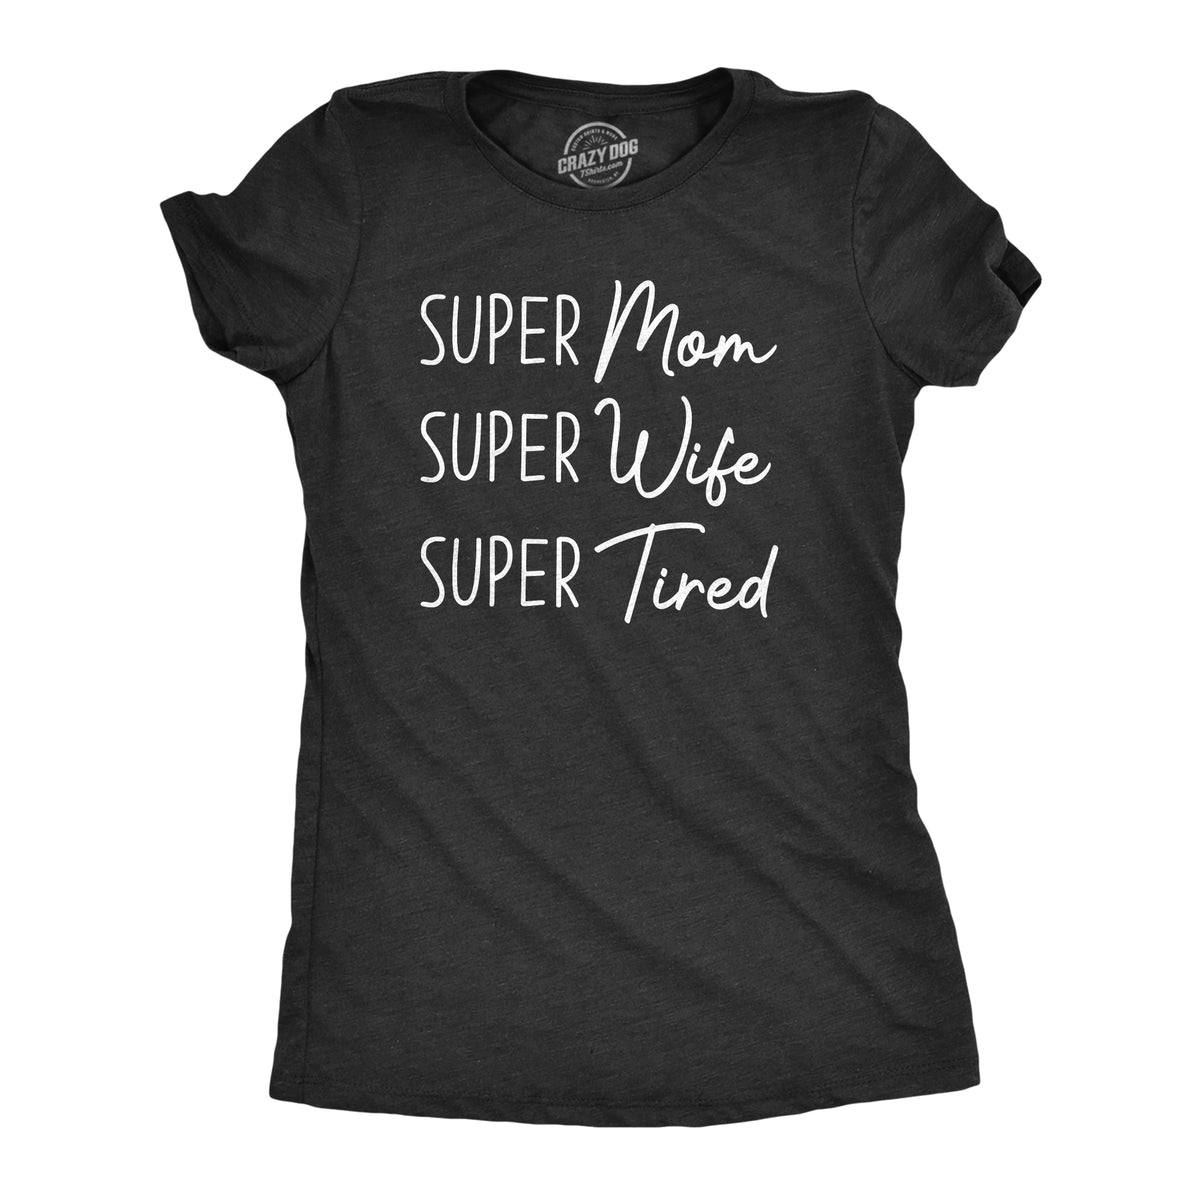 Funny Heather Black - Super Tired Super Mom Super Wife Super Tired Womens T Shirt Nerdy Mother&#39;s Day Tee